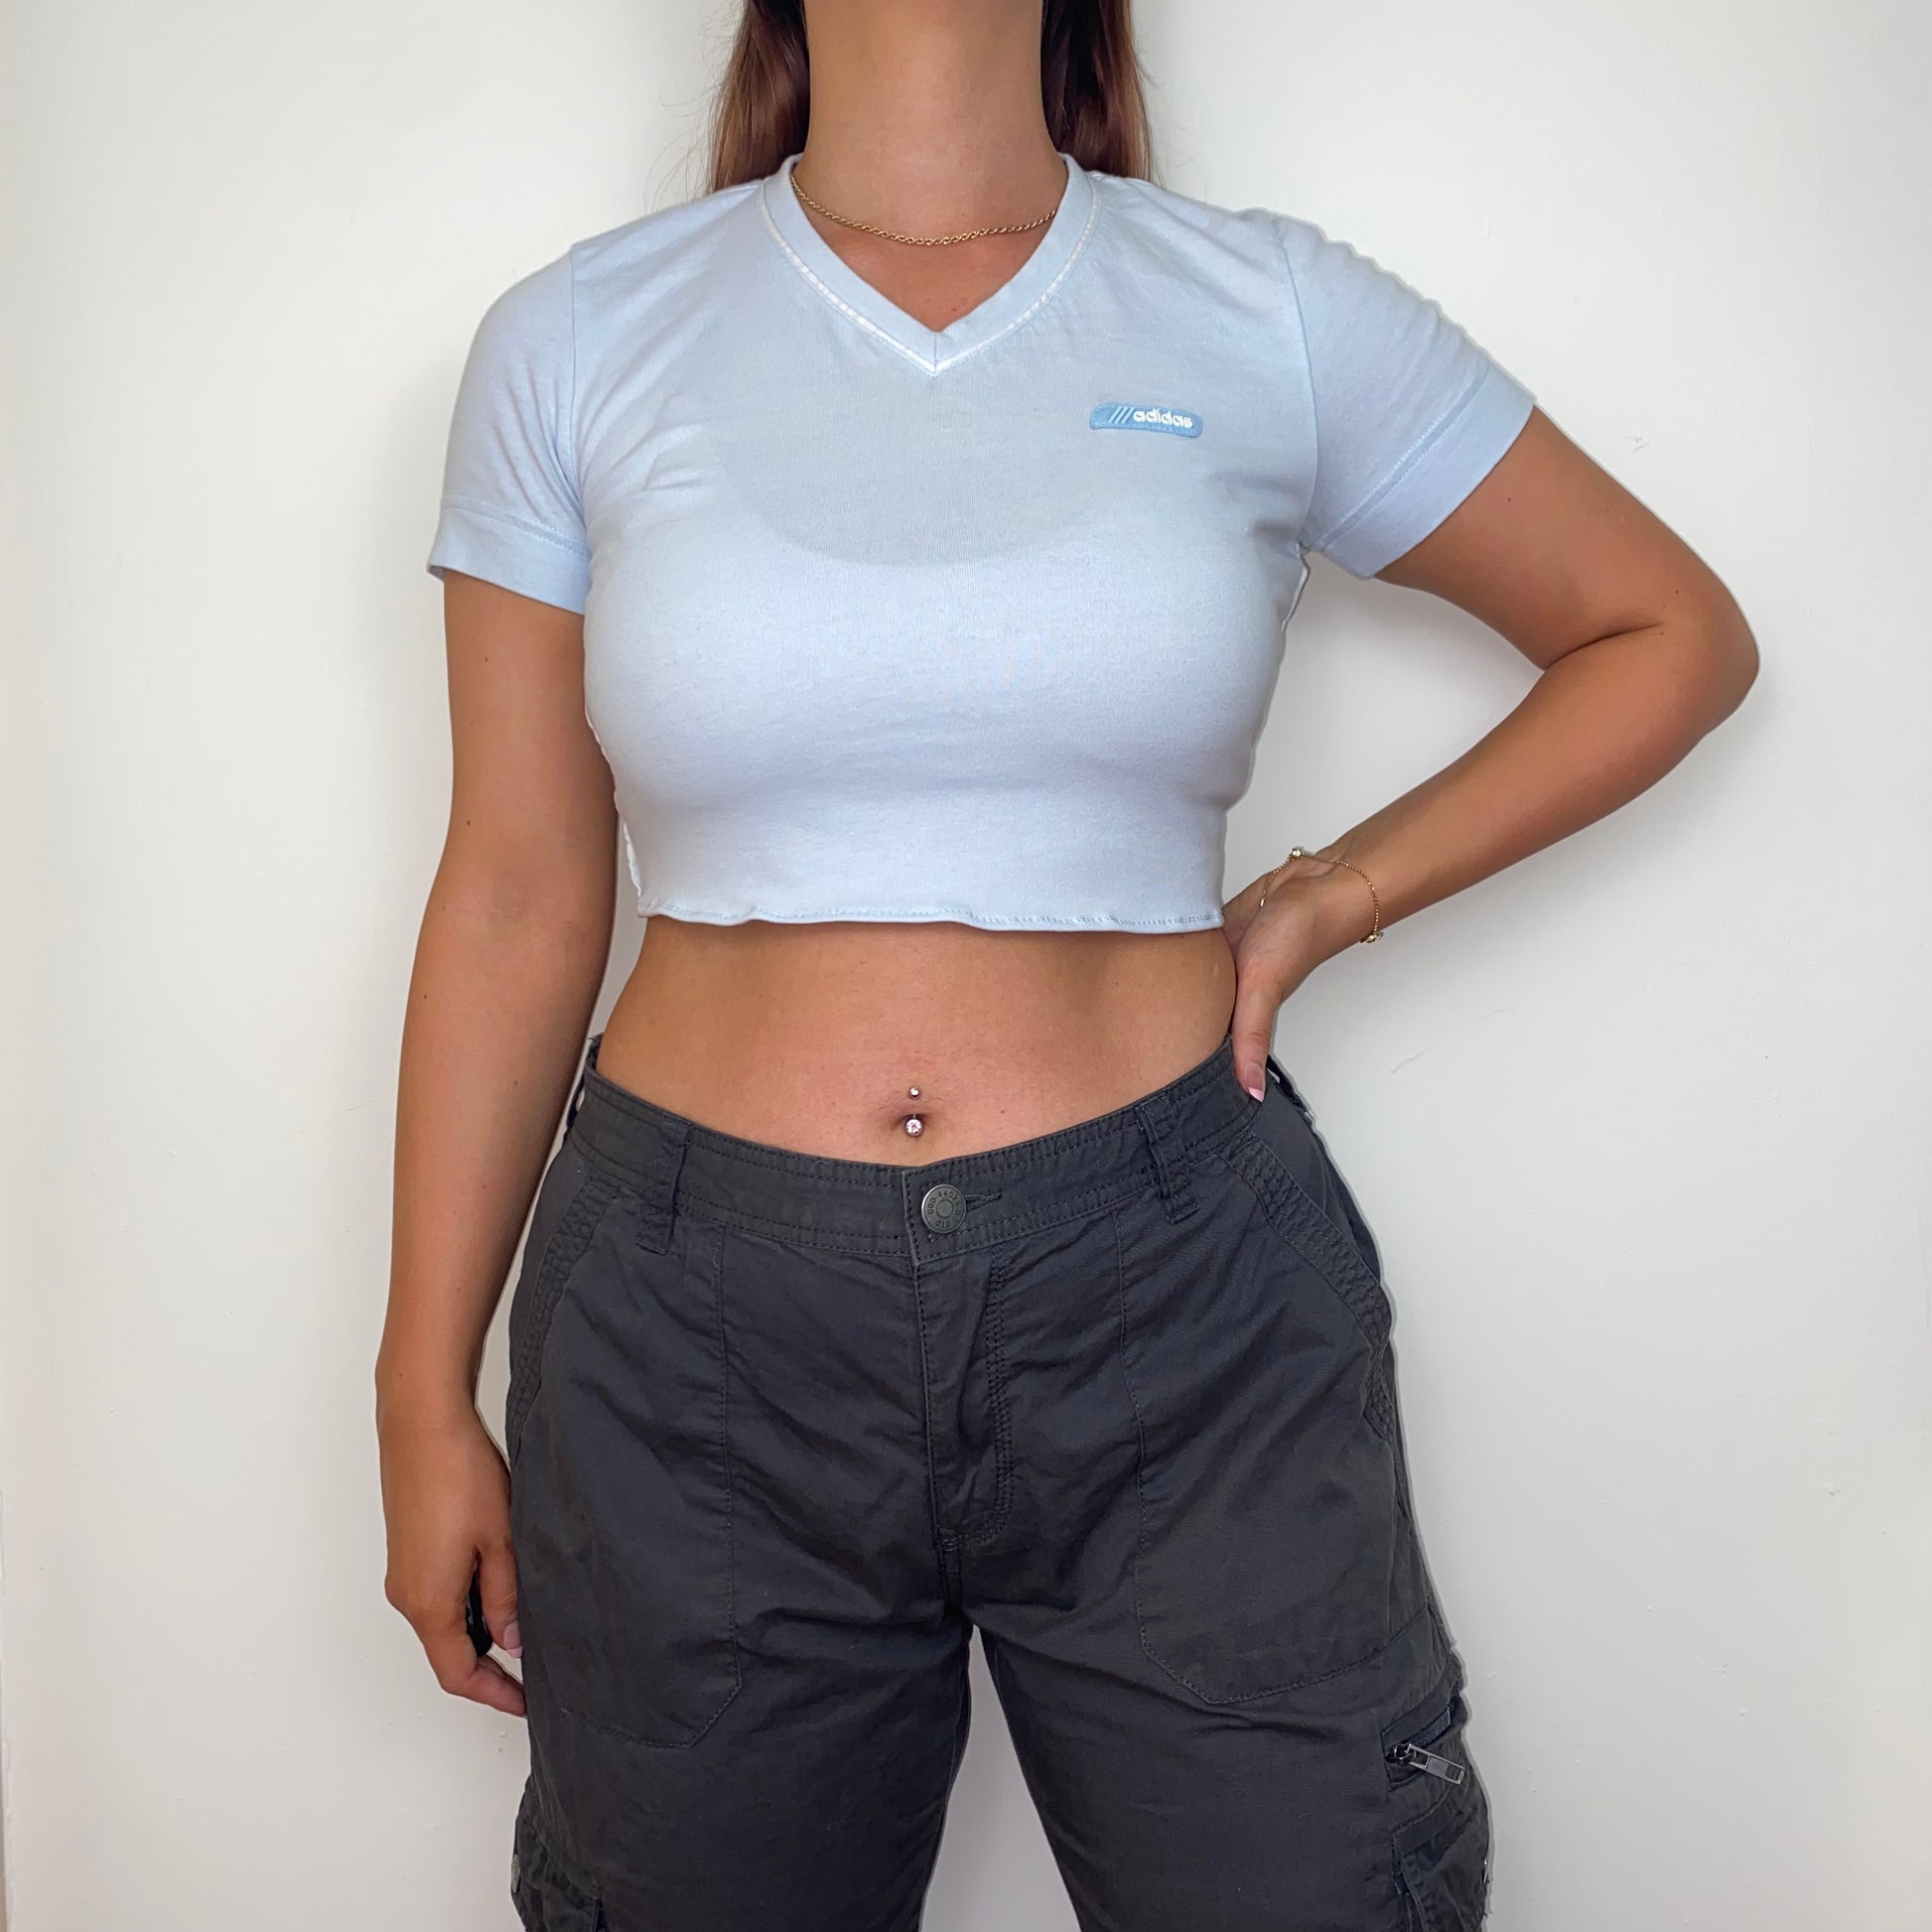 light blue short sleeve crop top with white adidas logo shown on a model wearing grey trousers